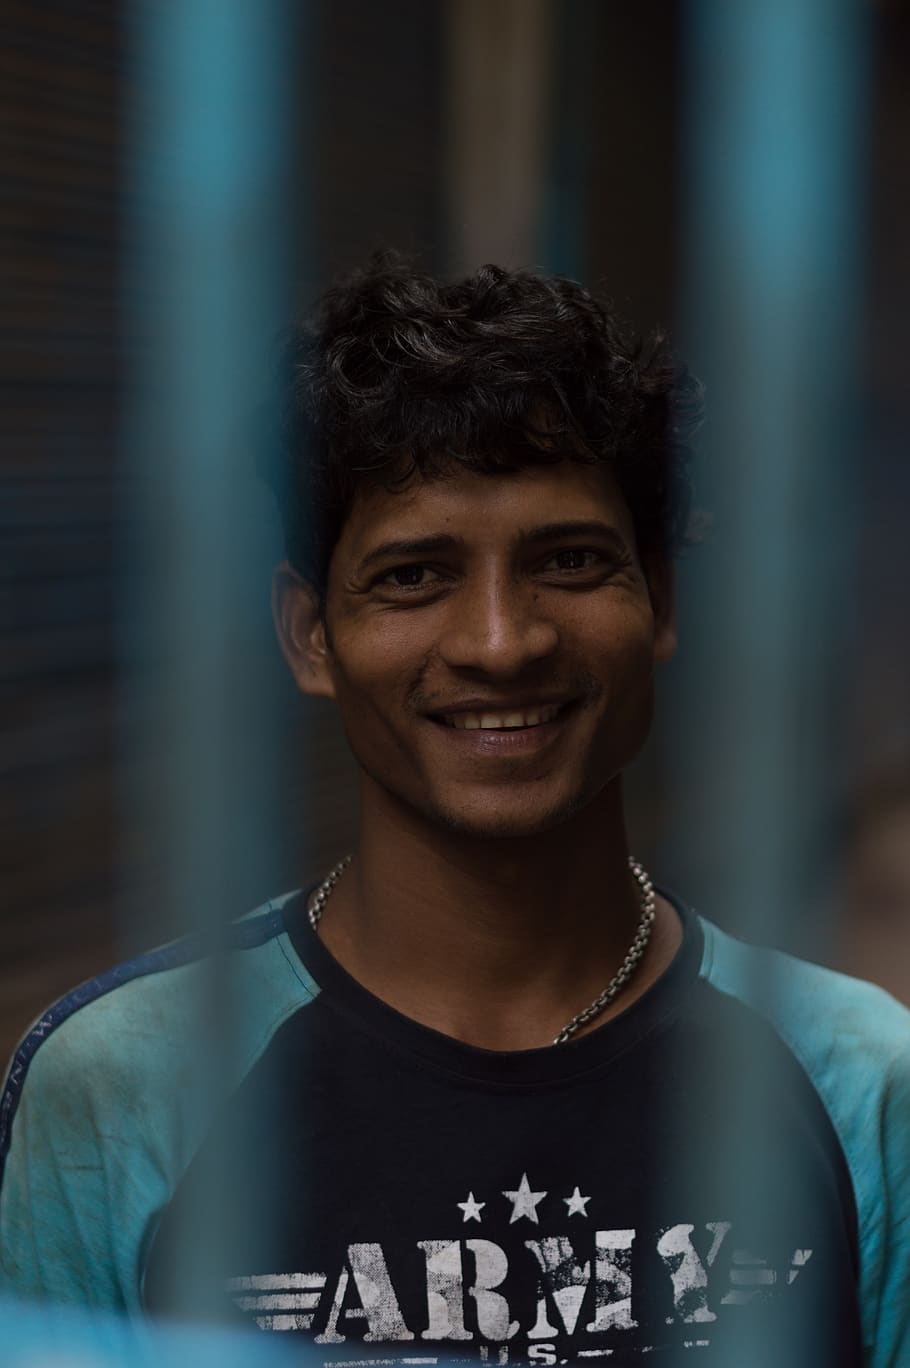 man, happy man, portrait, indian, asian, smile, man behind bars, smiling, one person, front view